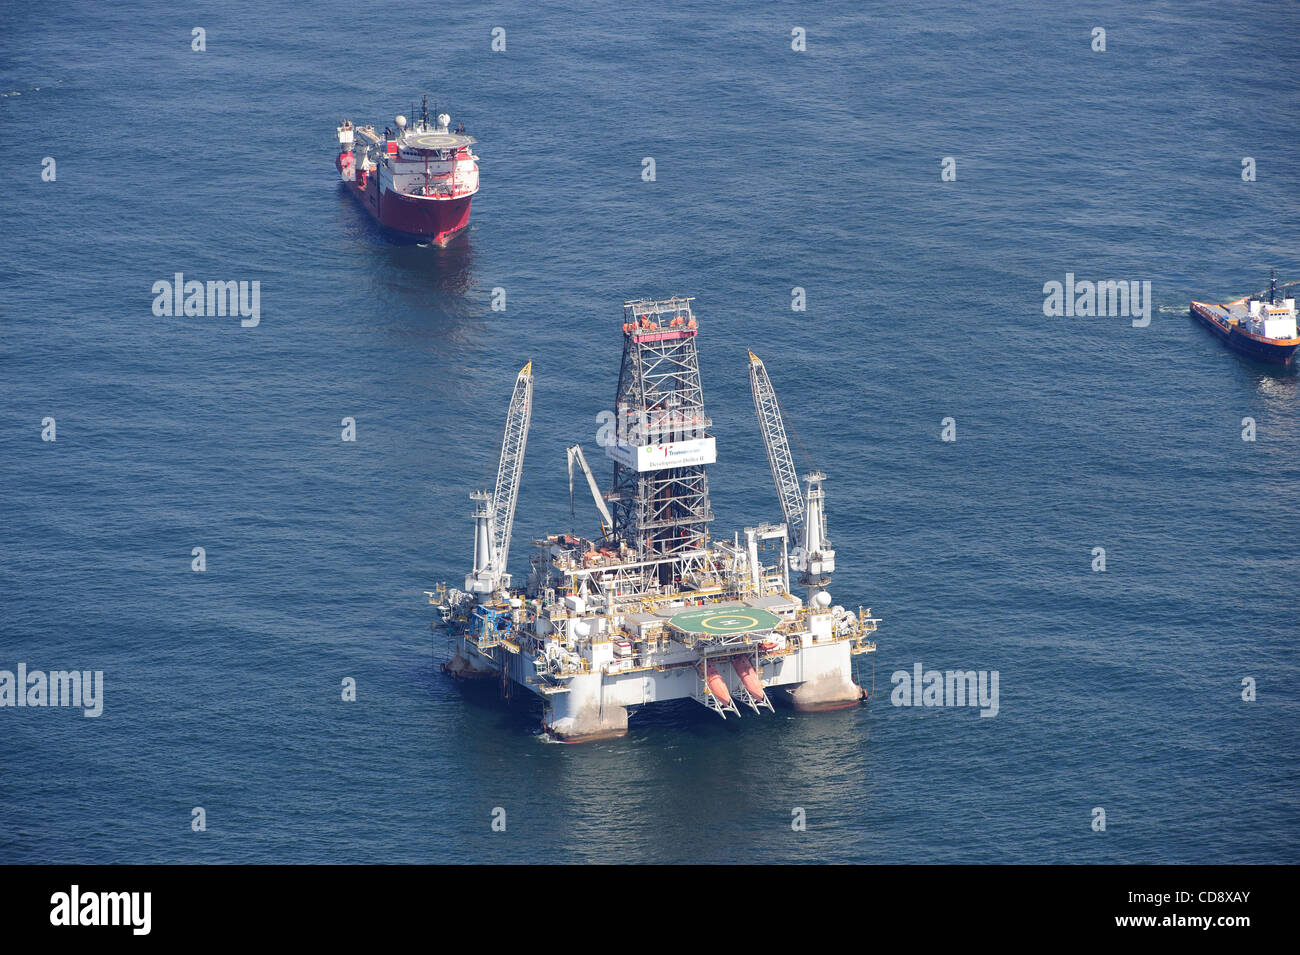 Development driller 2 and support boats at the site of the deepwater horizon oil spill site. The oil leak was capped on july 15th , but the  relief wells continue to permanently seal the busted well. Stock Photo